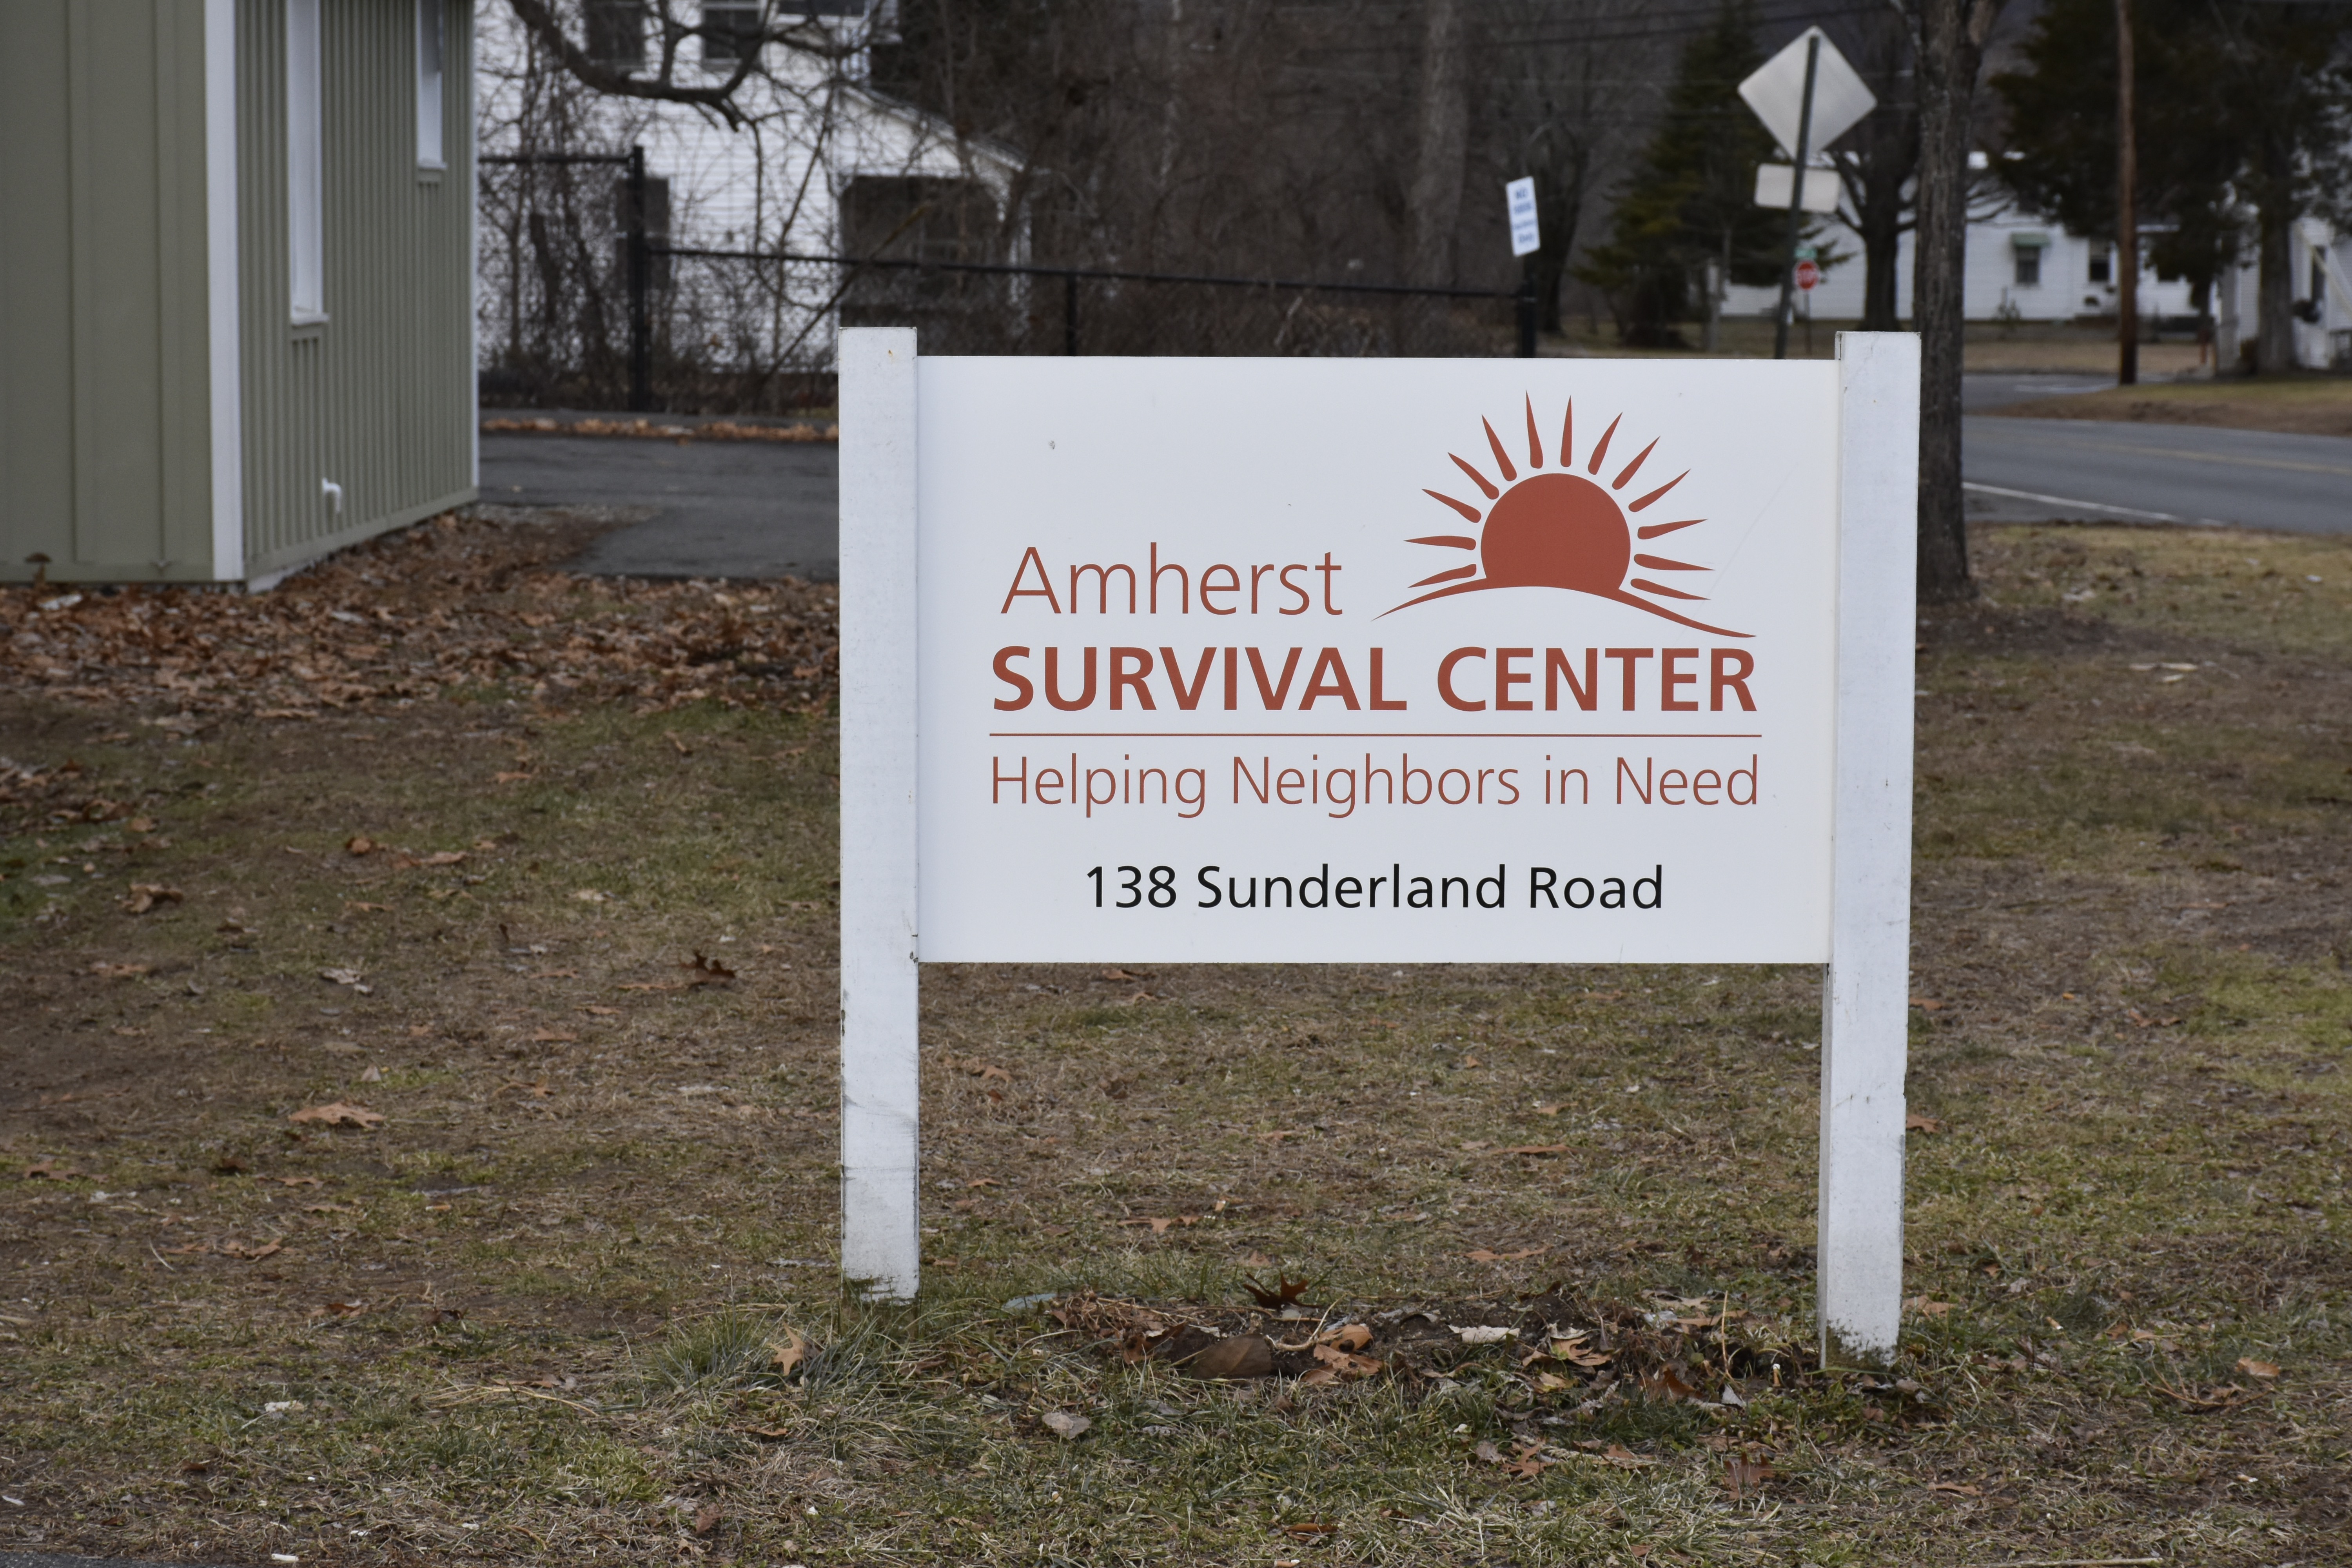 Jobs with Amherst Survival Center